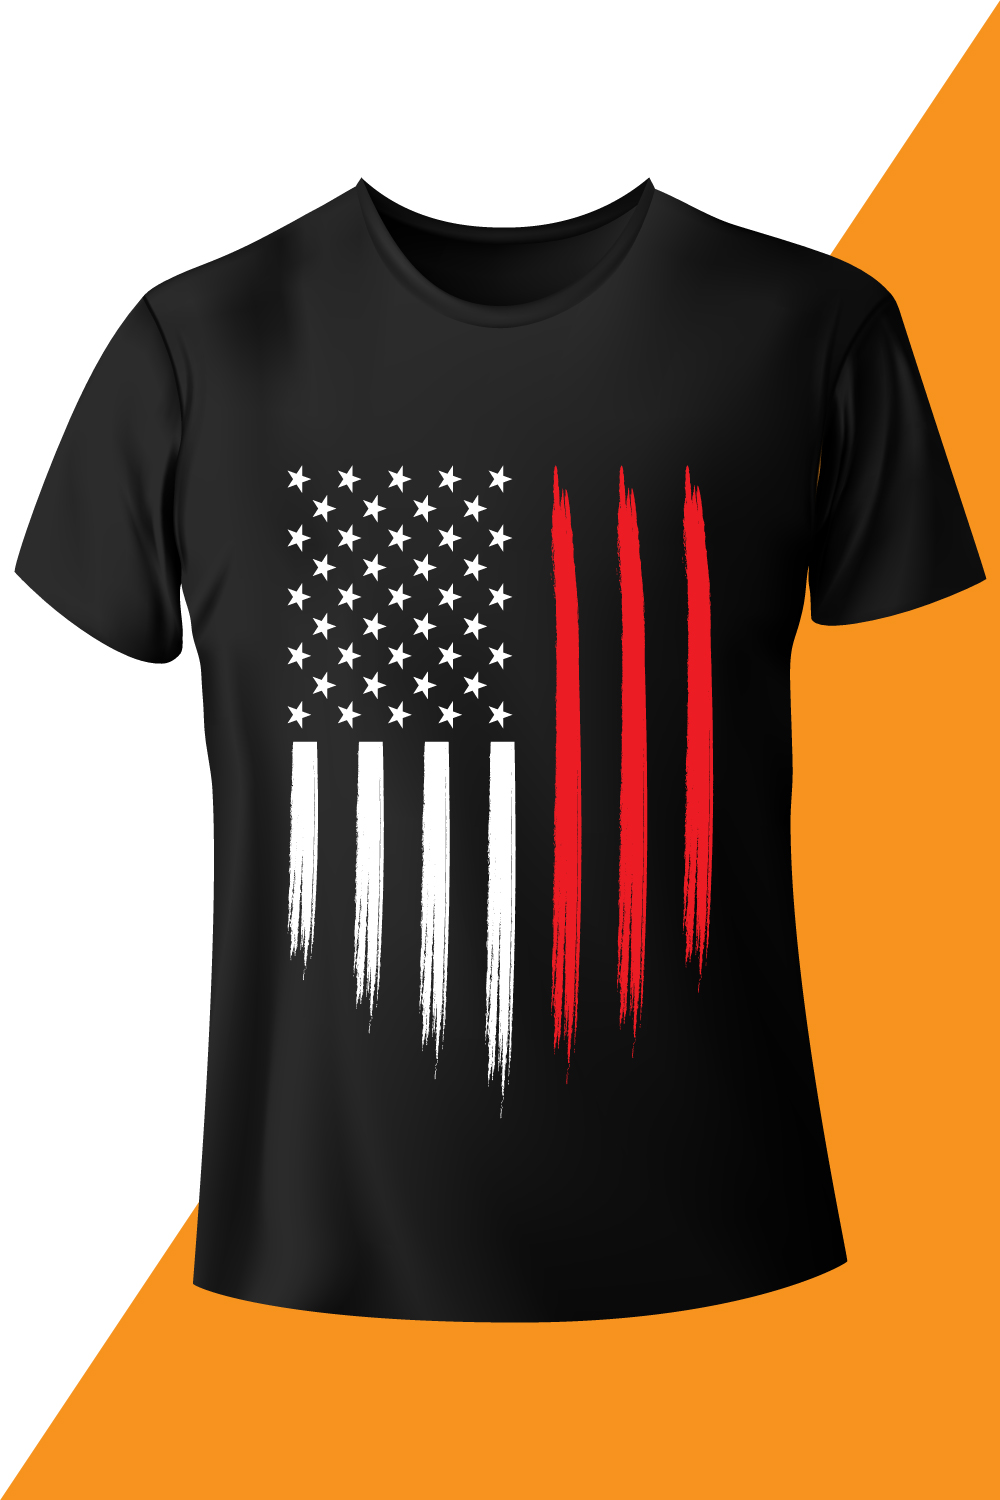 Image of a black t-shirt with an adorable print of the american flag.